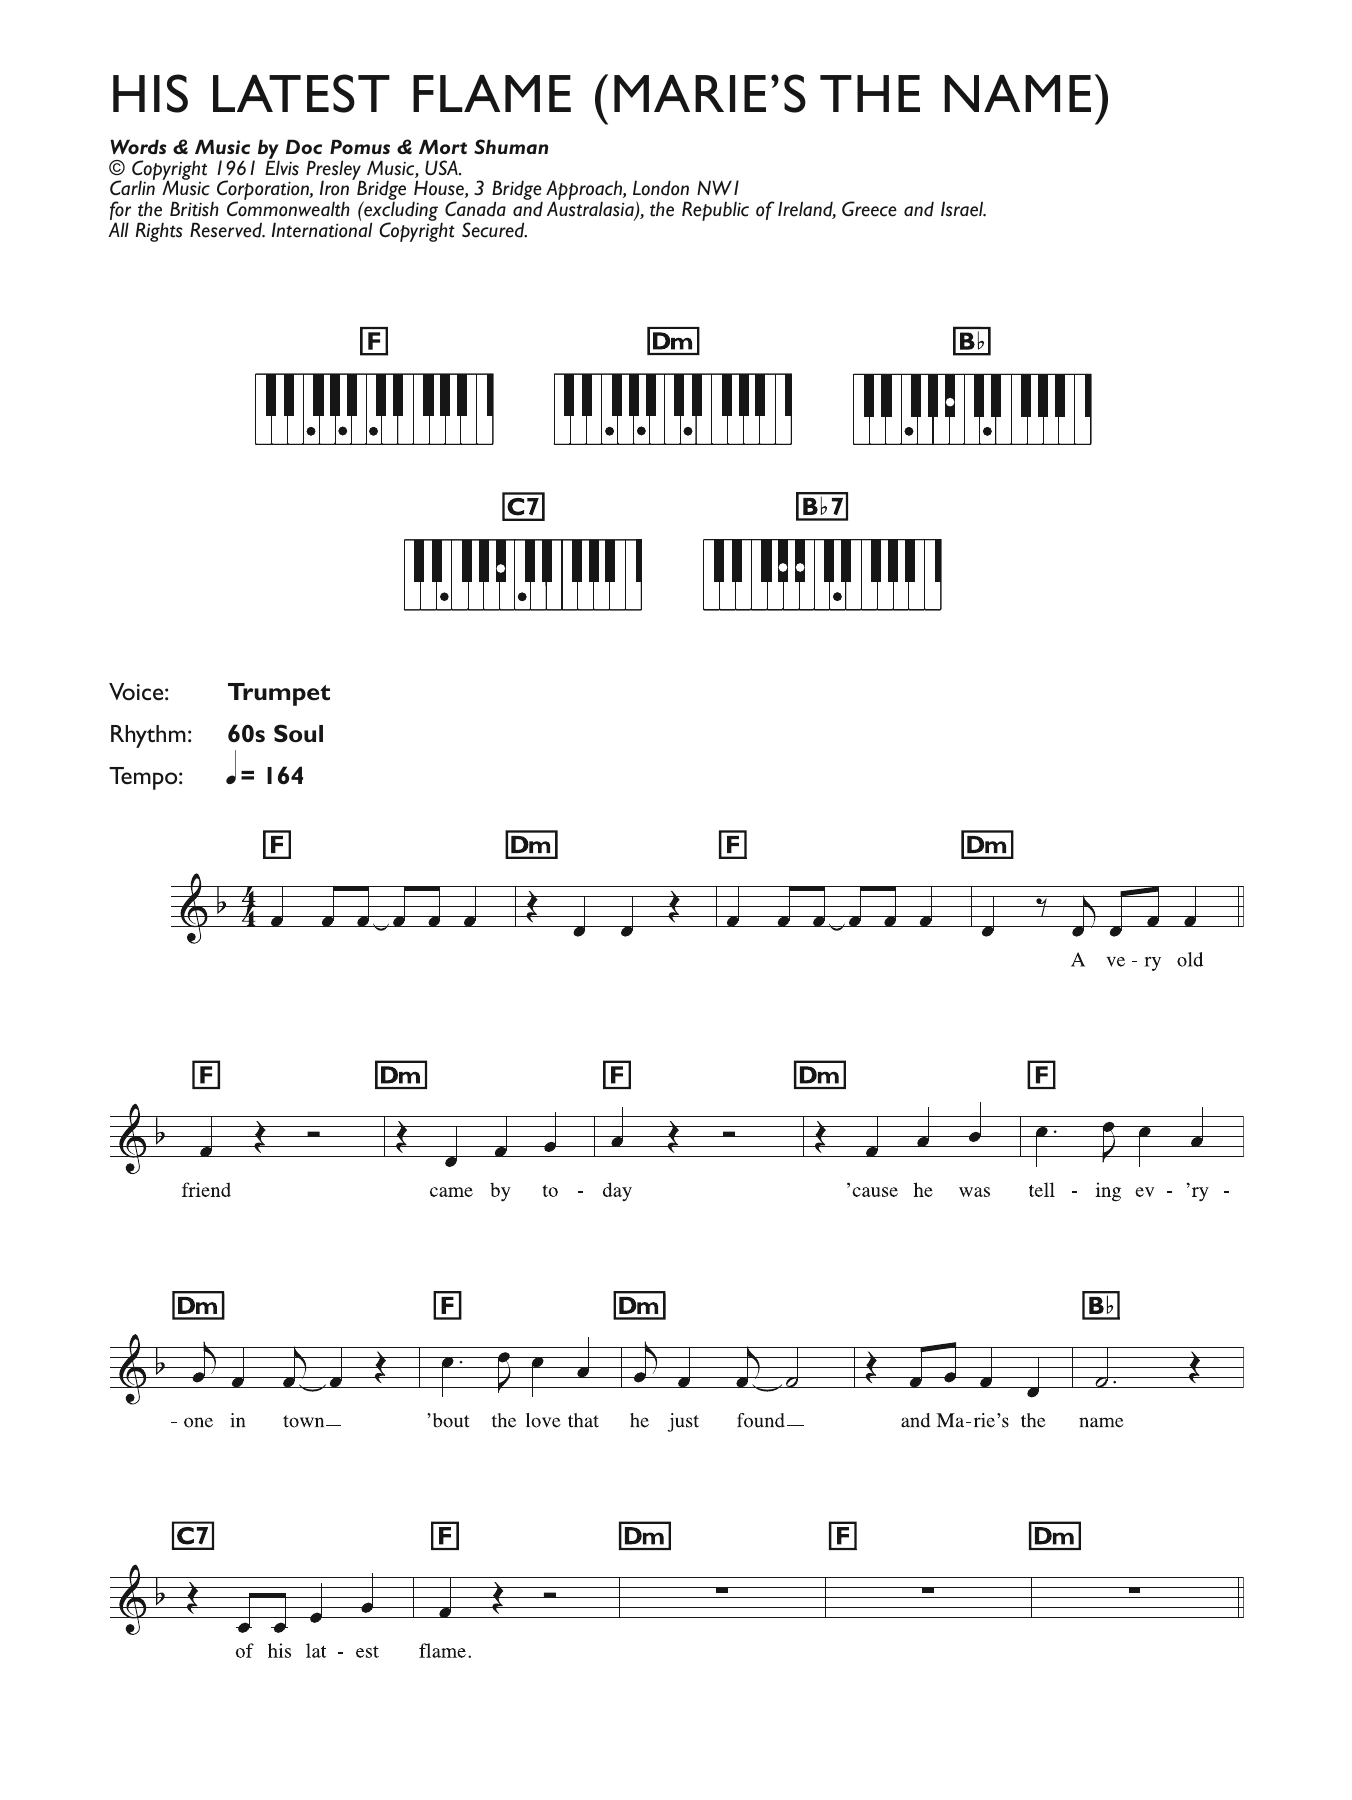 Download Elvis Presley (Marie's The Name) His Latest Flame Sheet Music